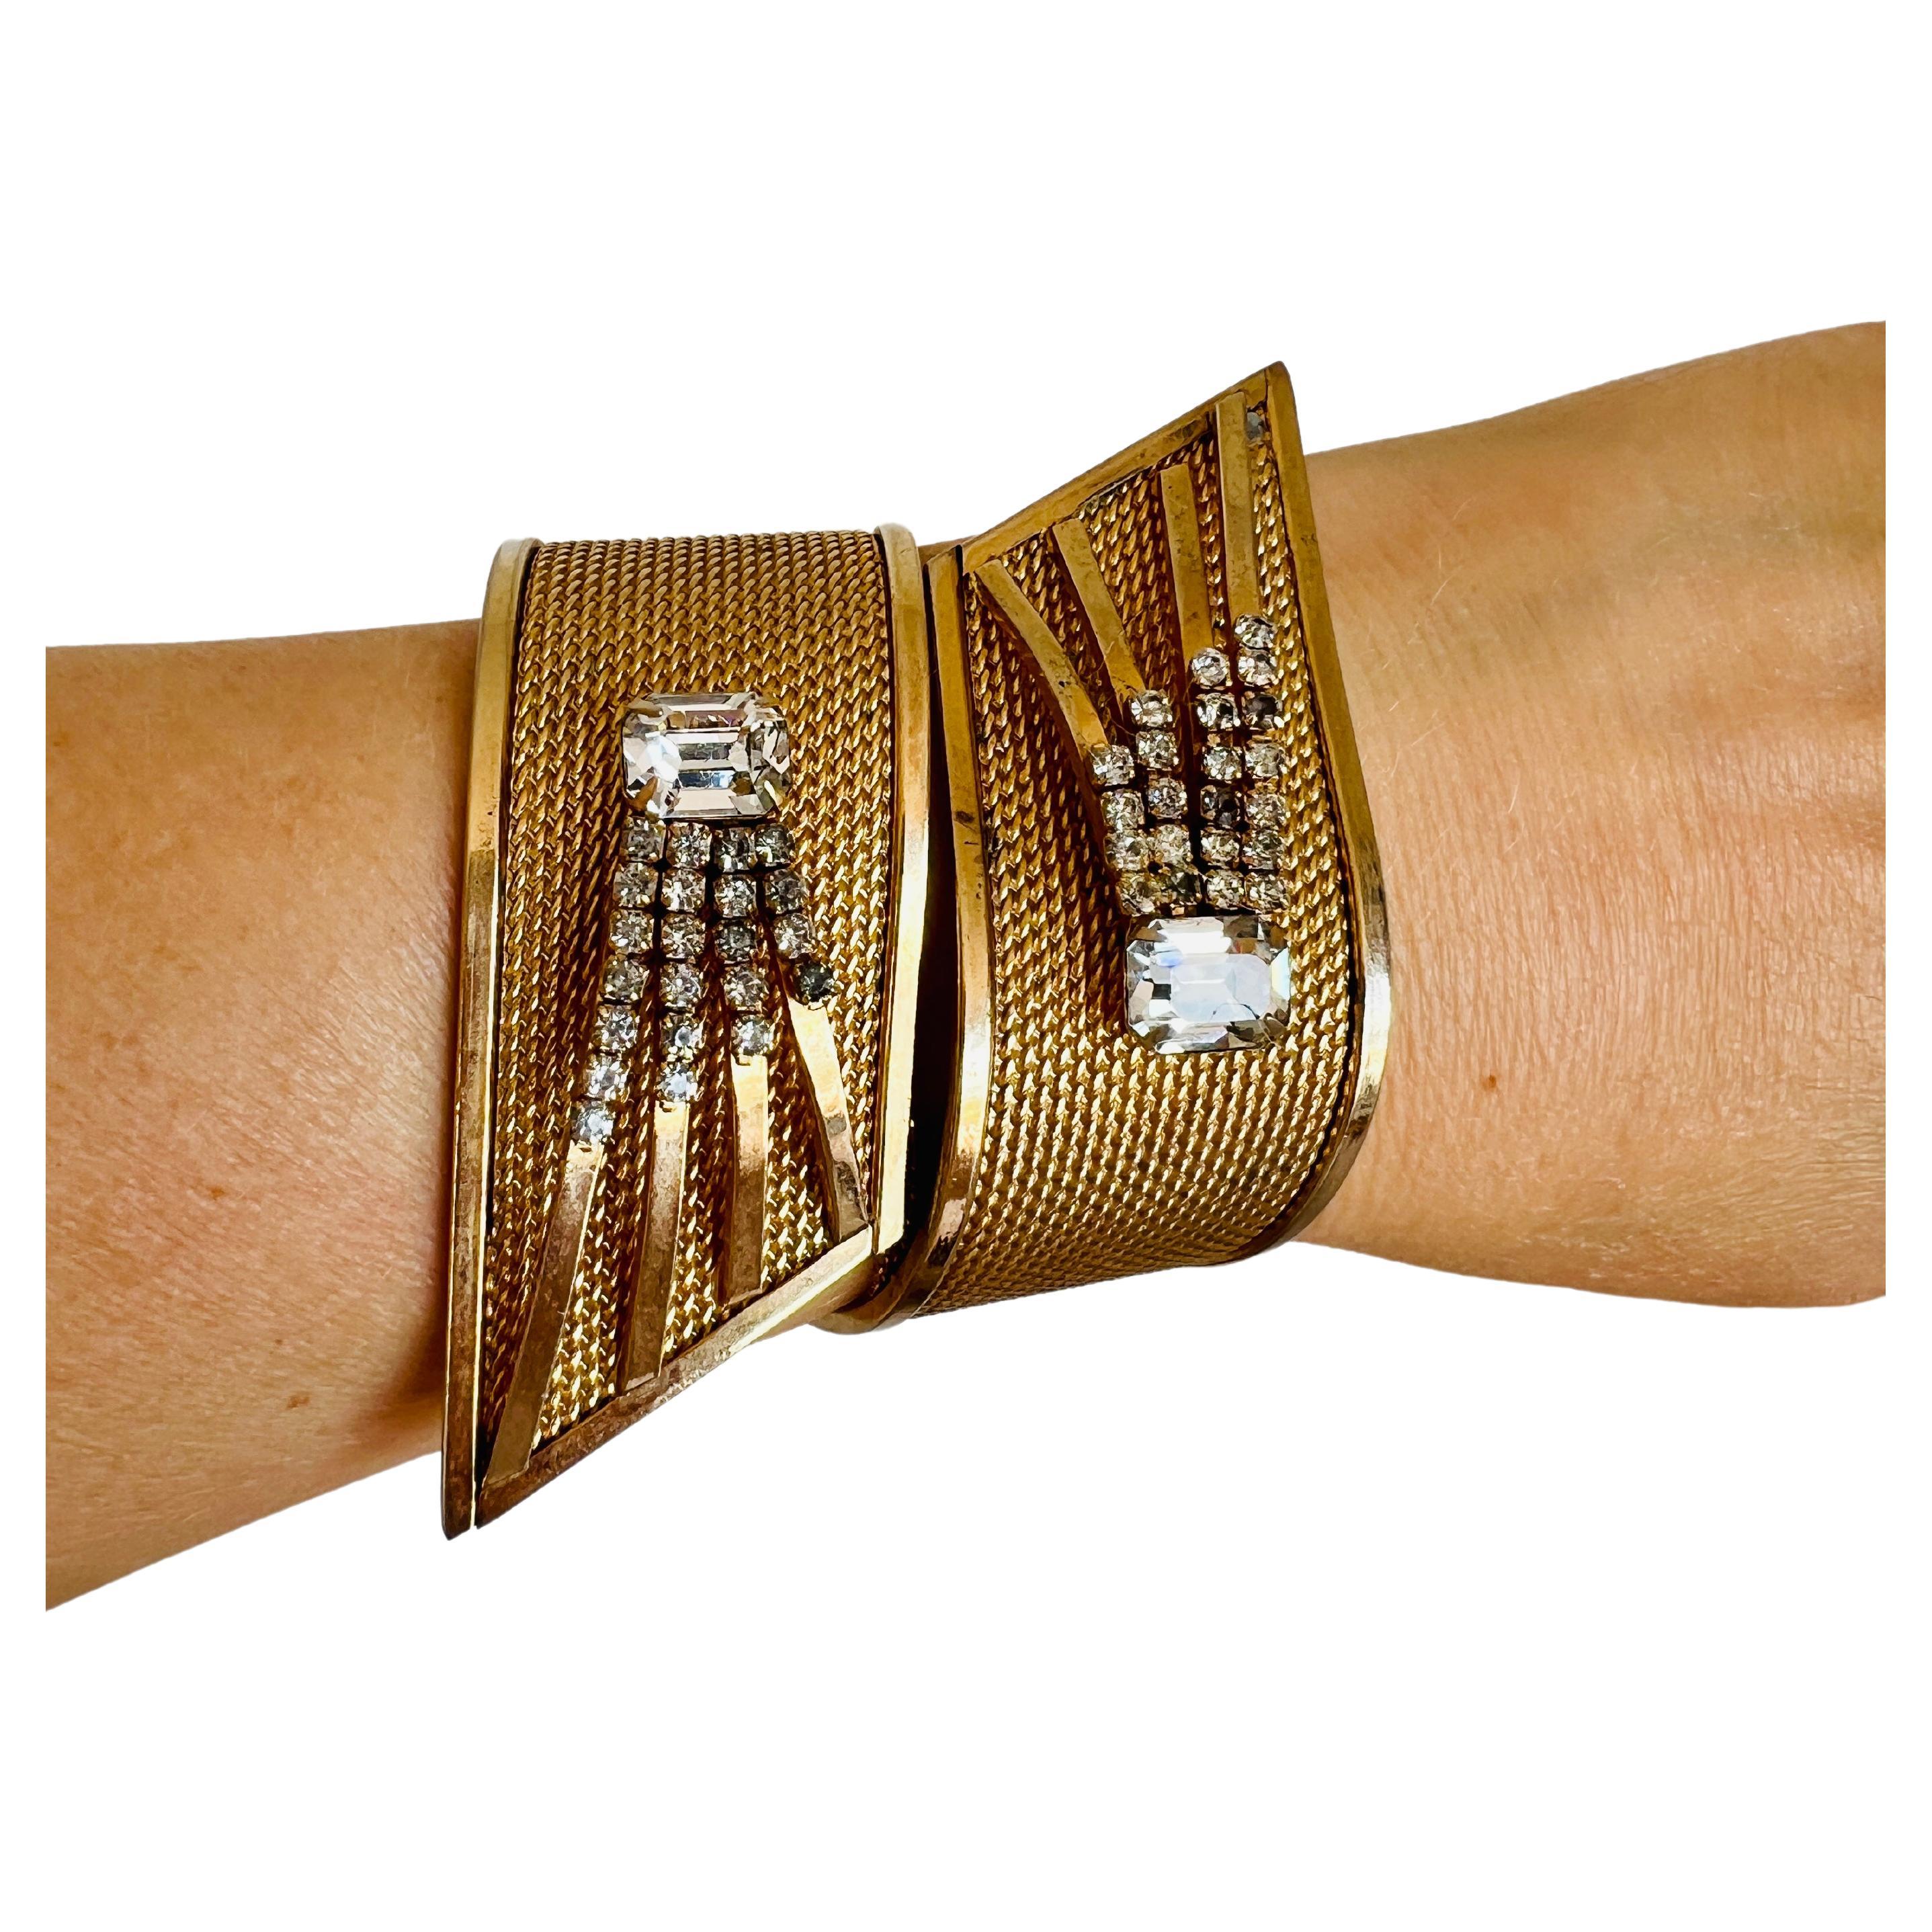 1950's Vargas extra wide hinged bracelet featuring a starburst design with gold mesh and clear prong set rhinestones. 

Size: Over 2-1/2